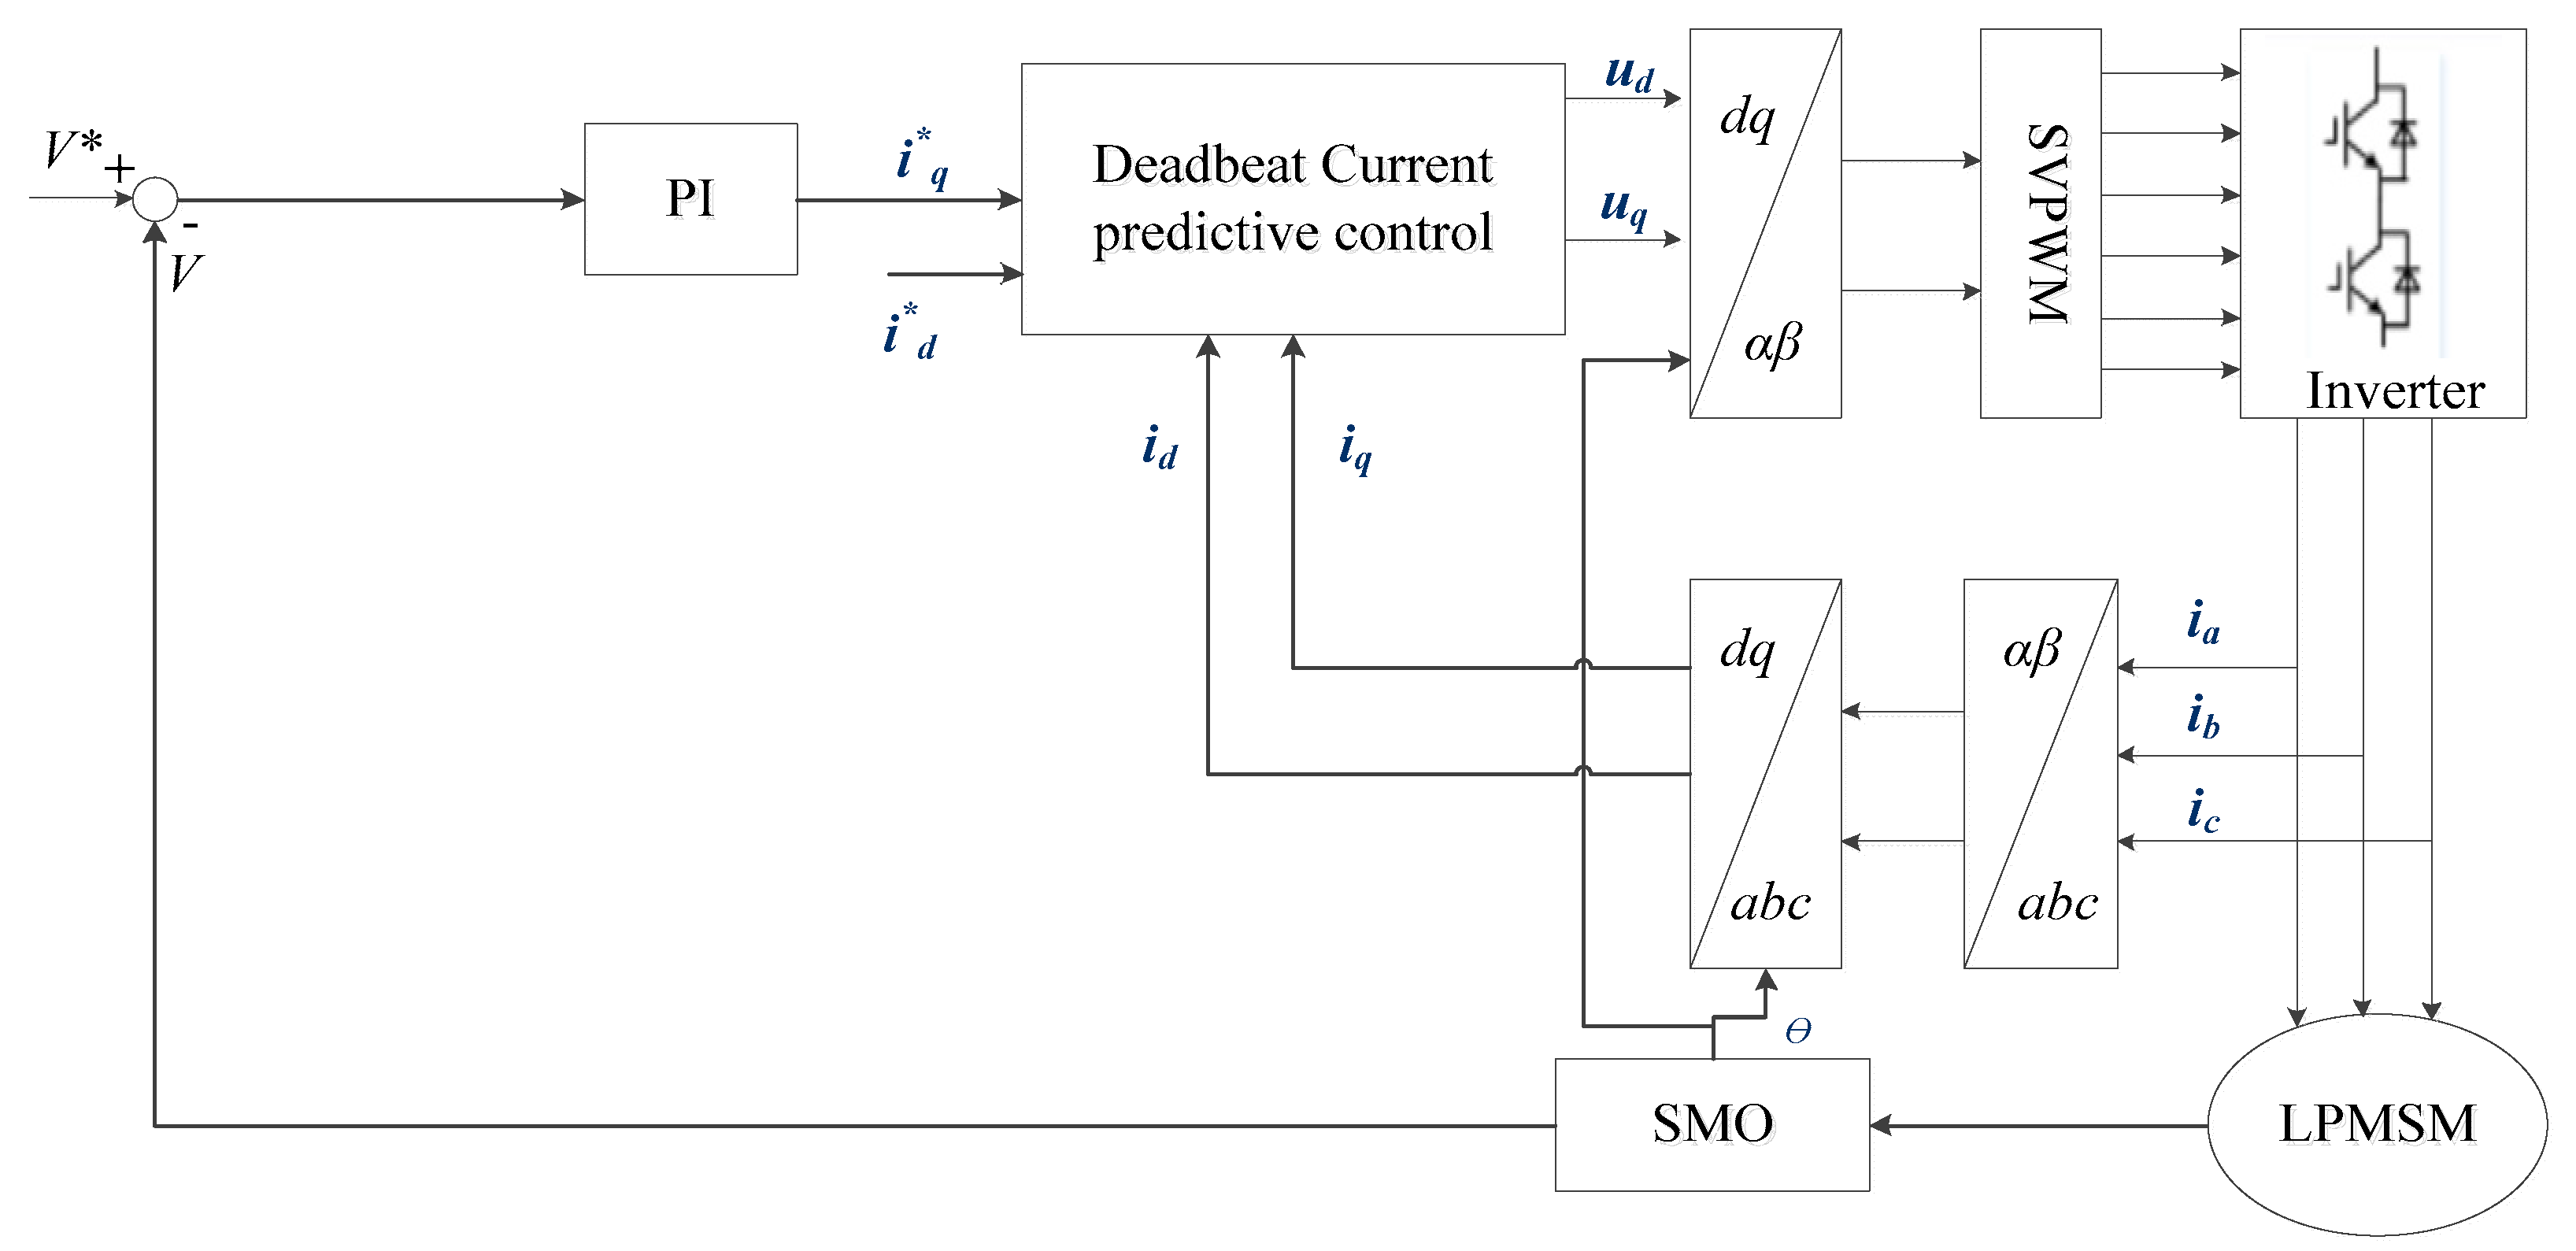 Solar power‐driven position sensorless control of permanent magnet  brushless DC motor for refrigeration plant - Dubey - 2020 - International  Transactions on Electrical Energy Systems - Wiley Online Library